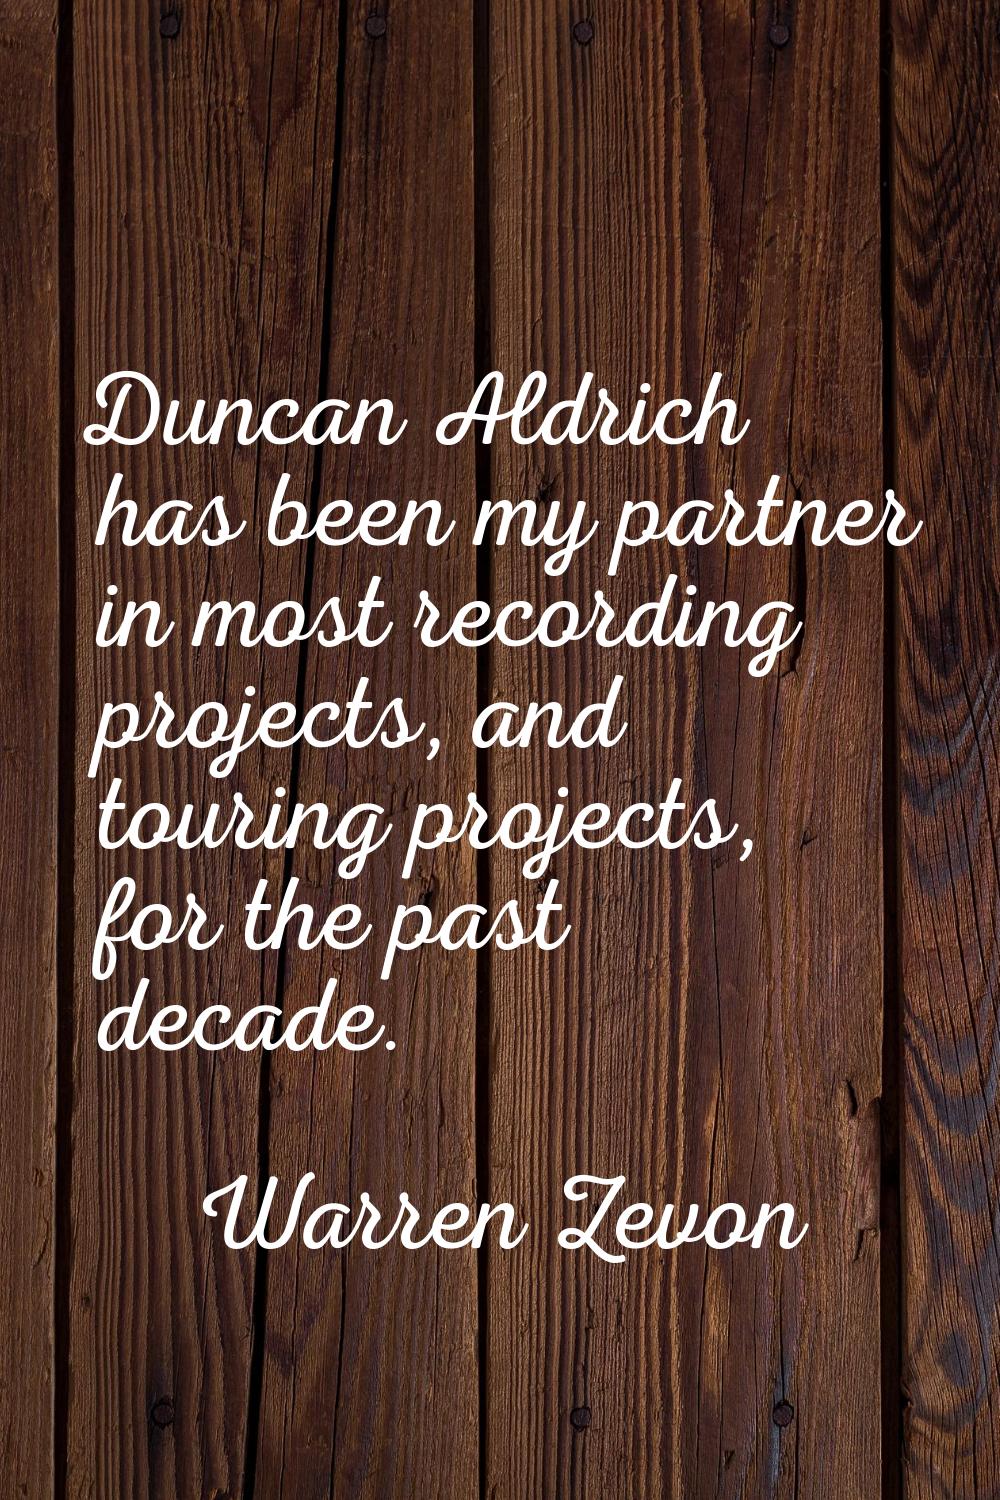 Duncan Aldrich has been my partner in most recording projects, and touring projects, for the past d